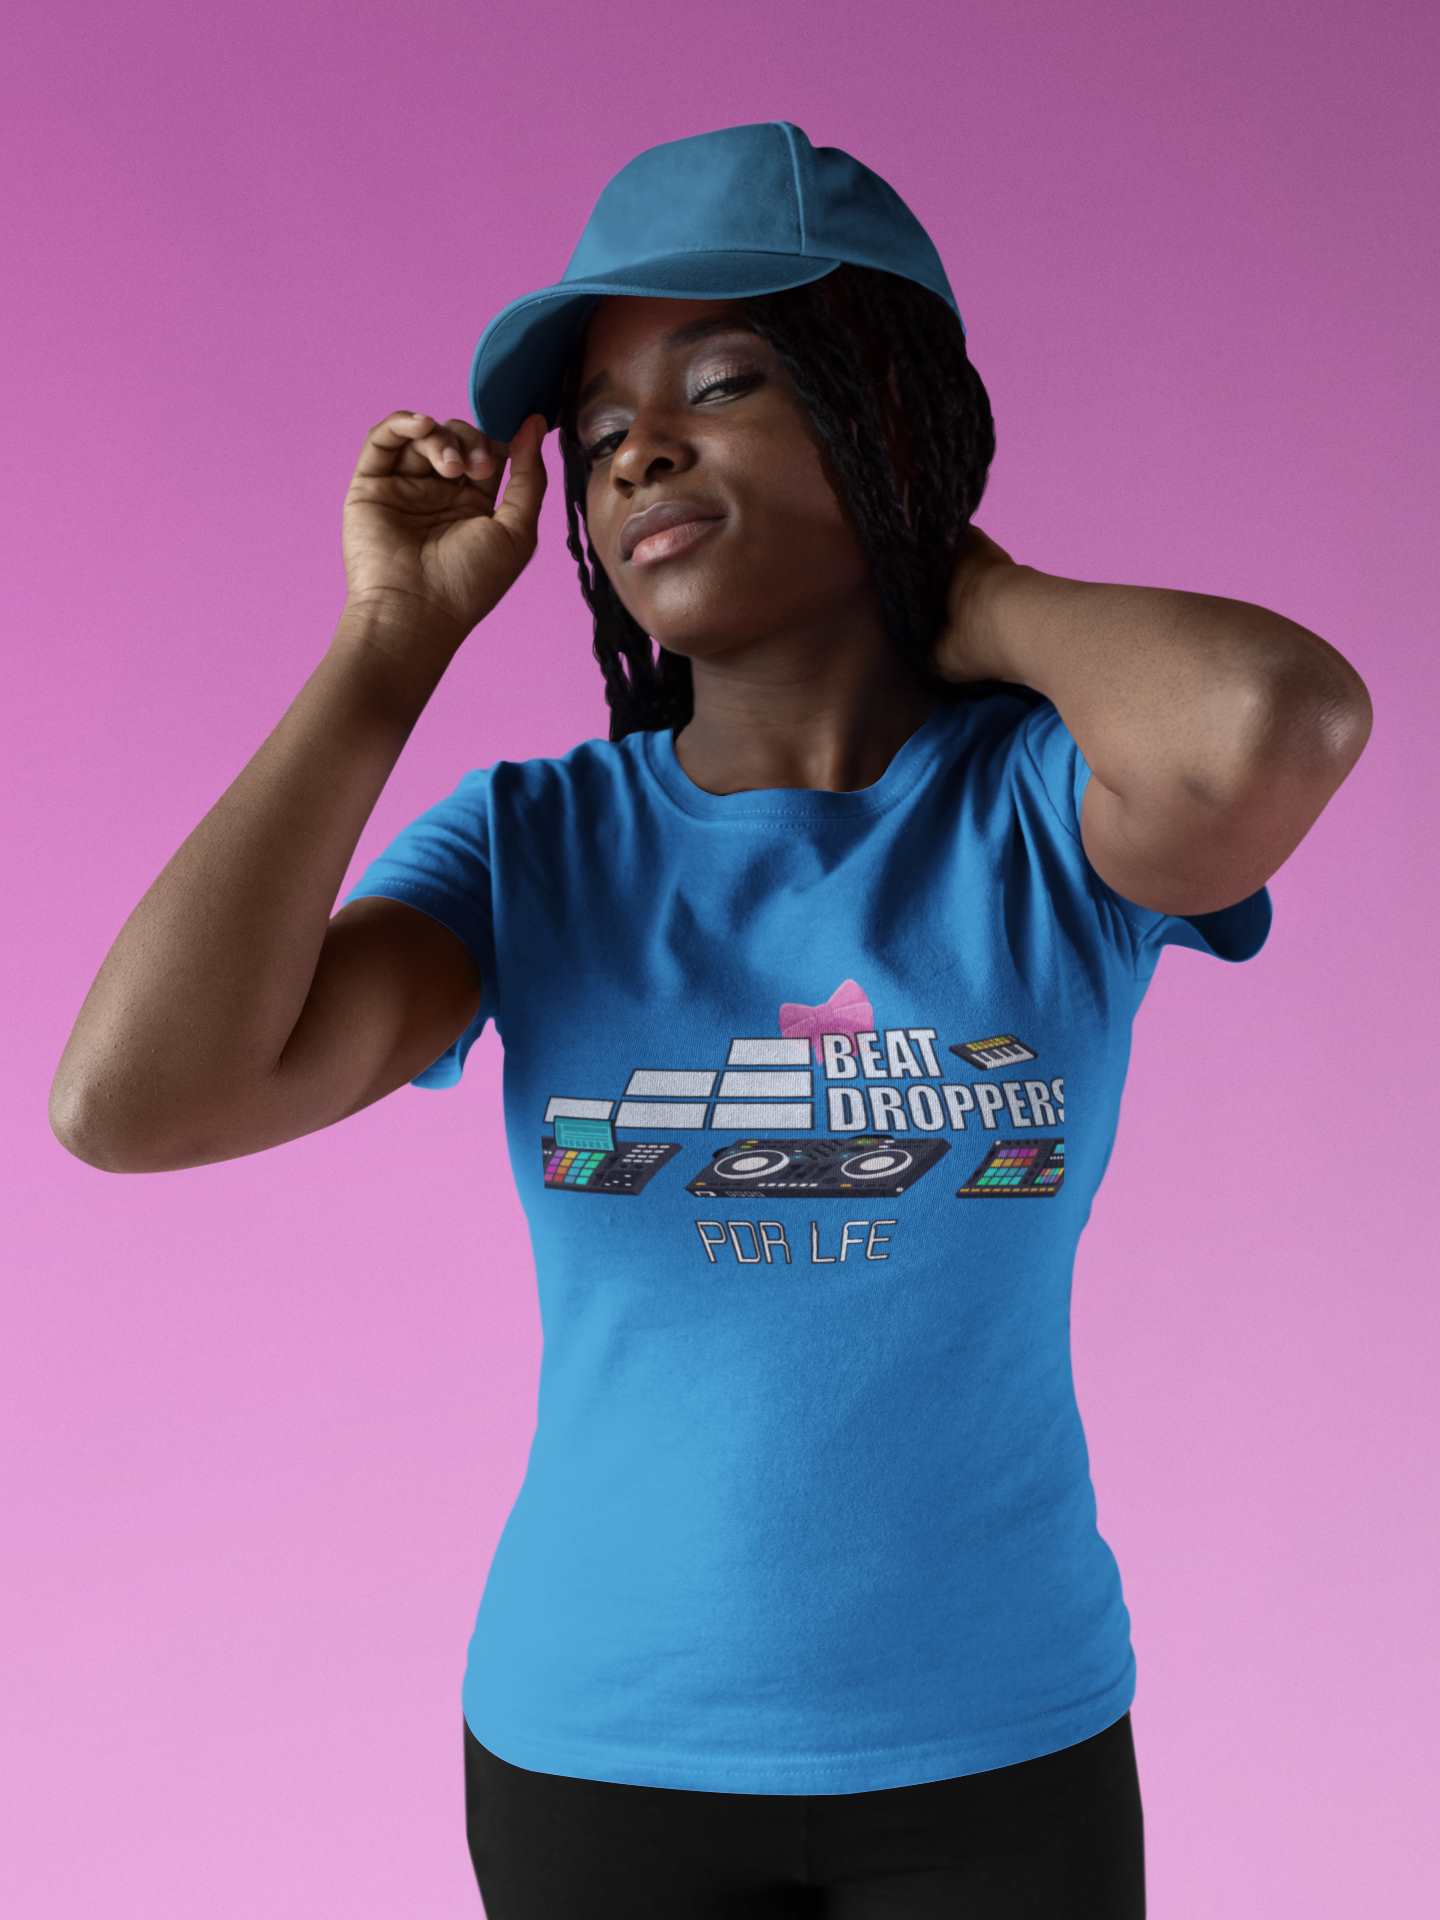 BEAT DROPPERS FEMALE Unisex Jersey Short Sleeve Tee - PDR L.F.E. 